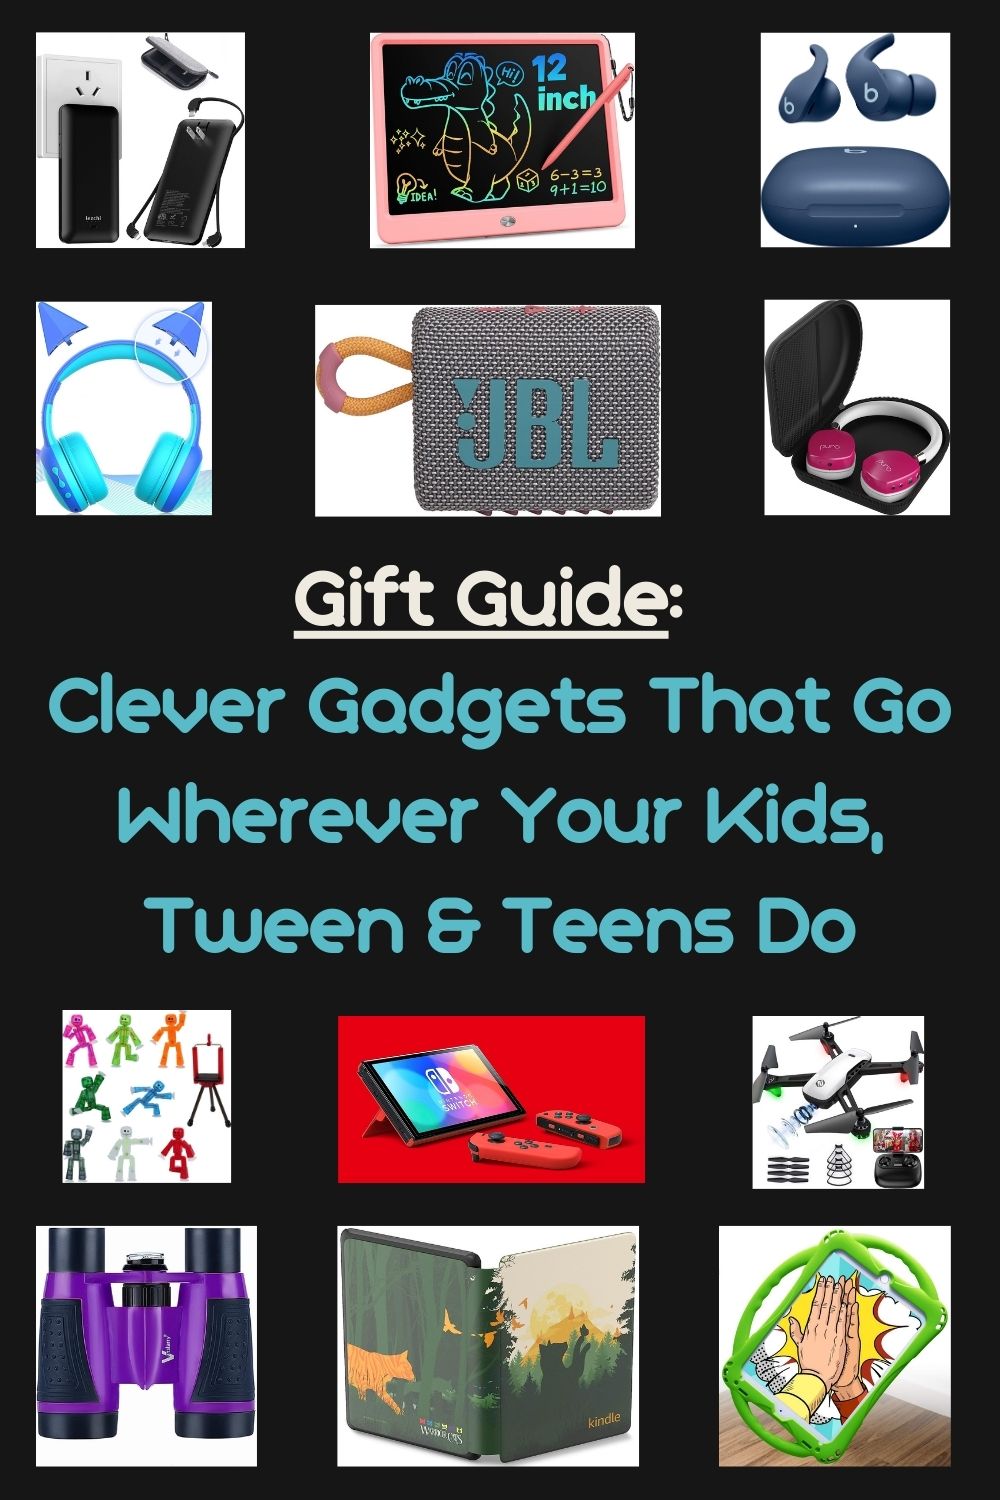 4 Things to Consider When Buying Tech Gifts for Kids - stlMotherhood